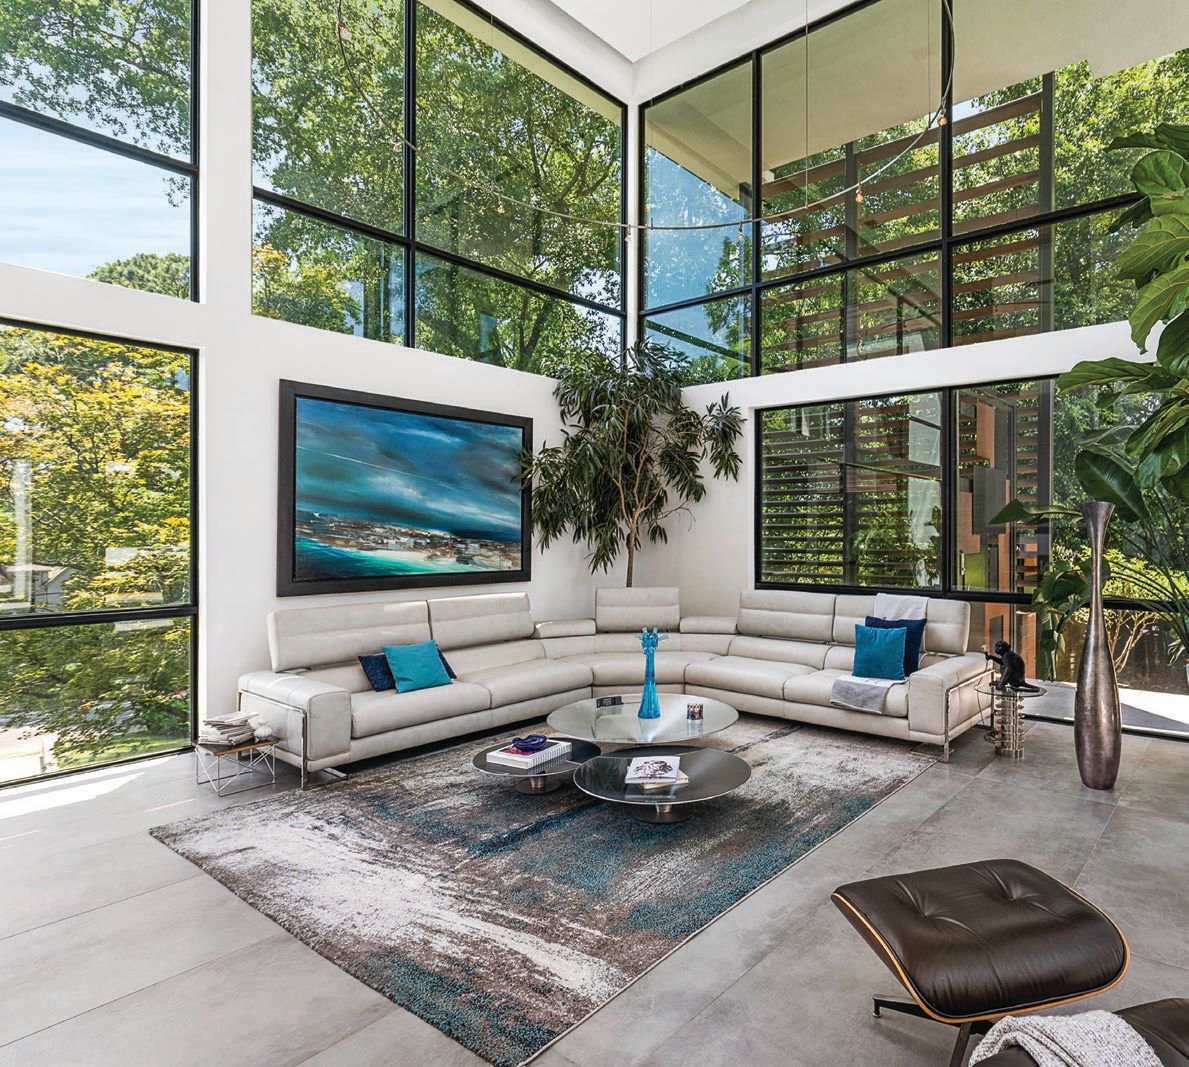 The living room features a whole wall of glass windows PHOTO BY JOSHUA BARTOLOTTI